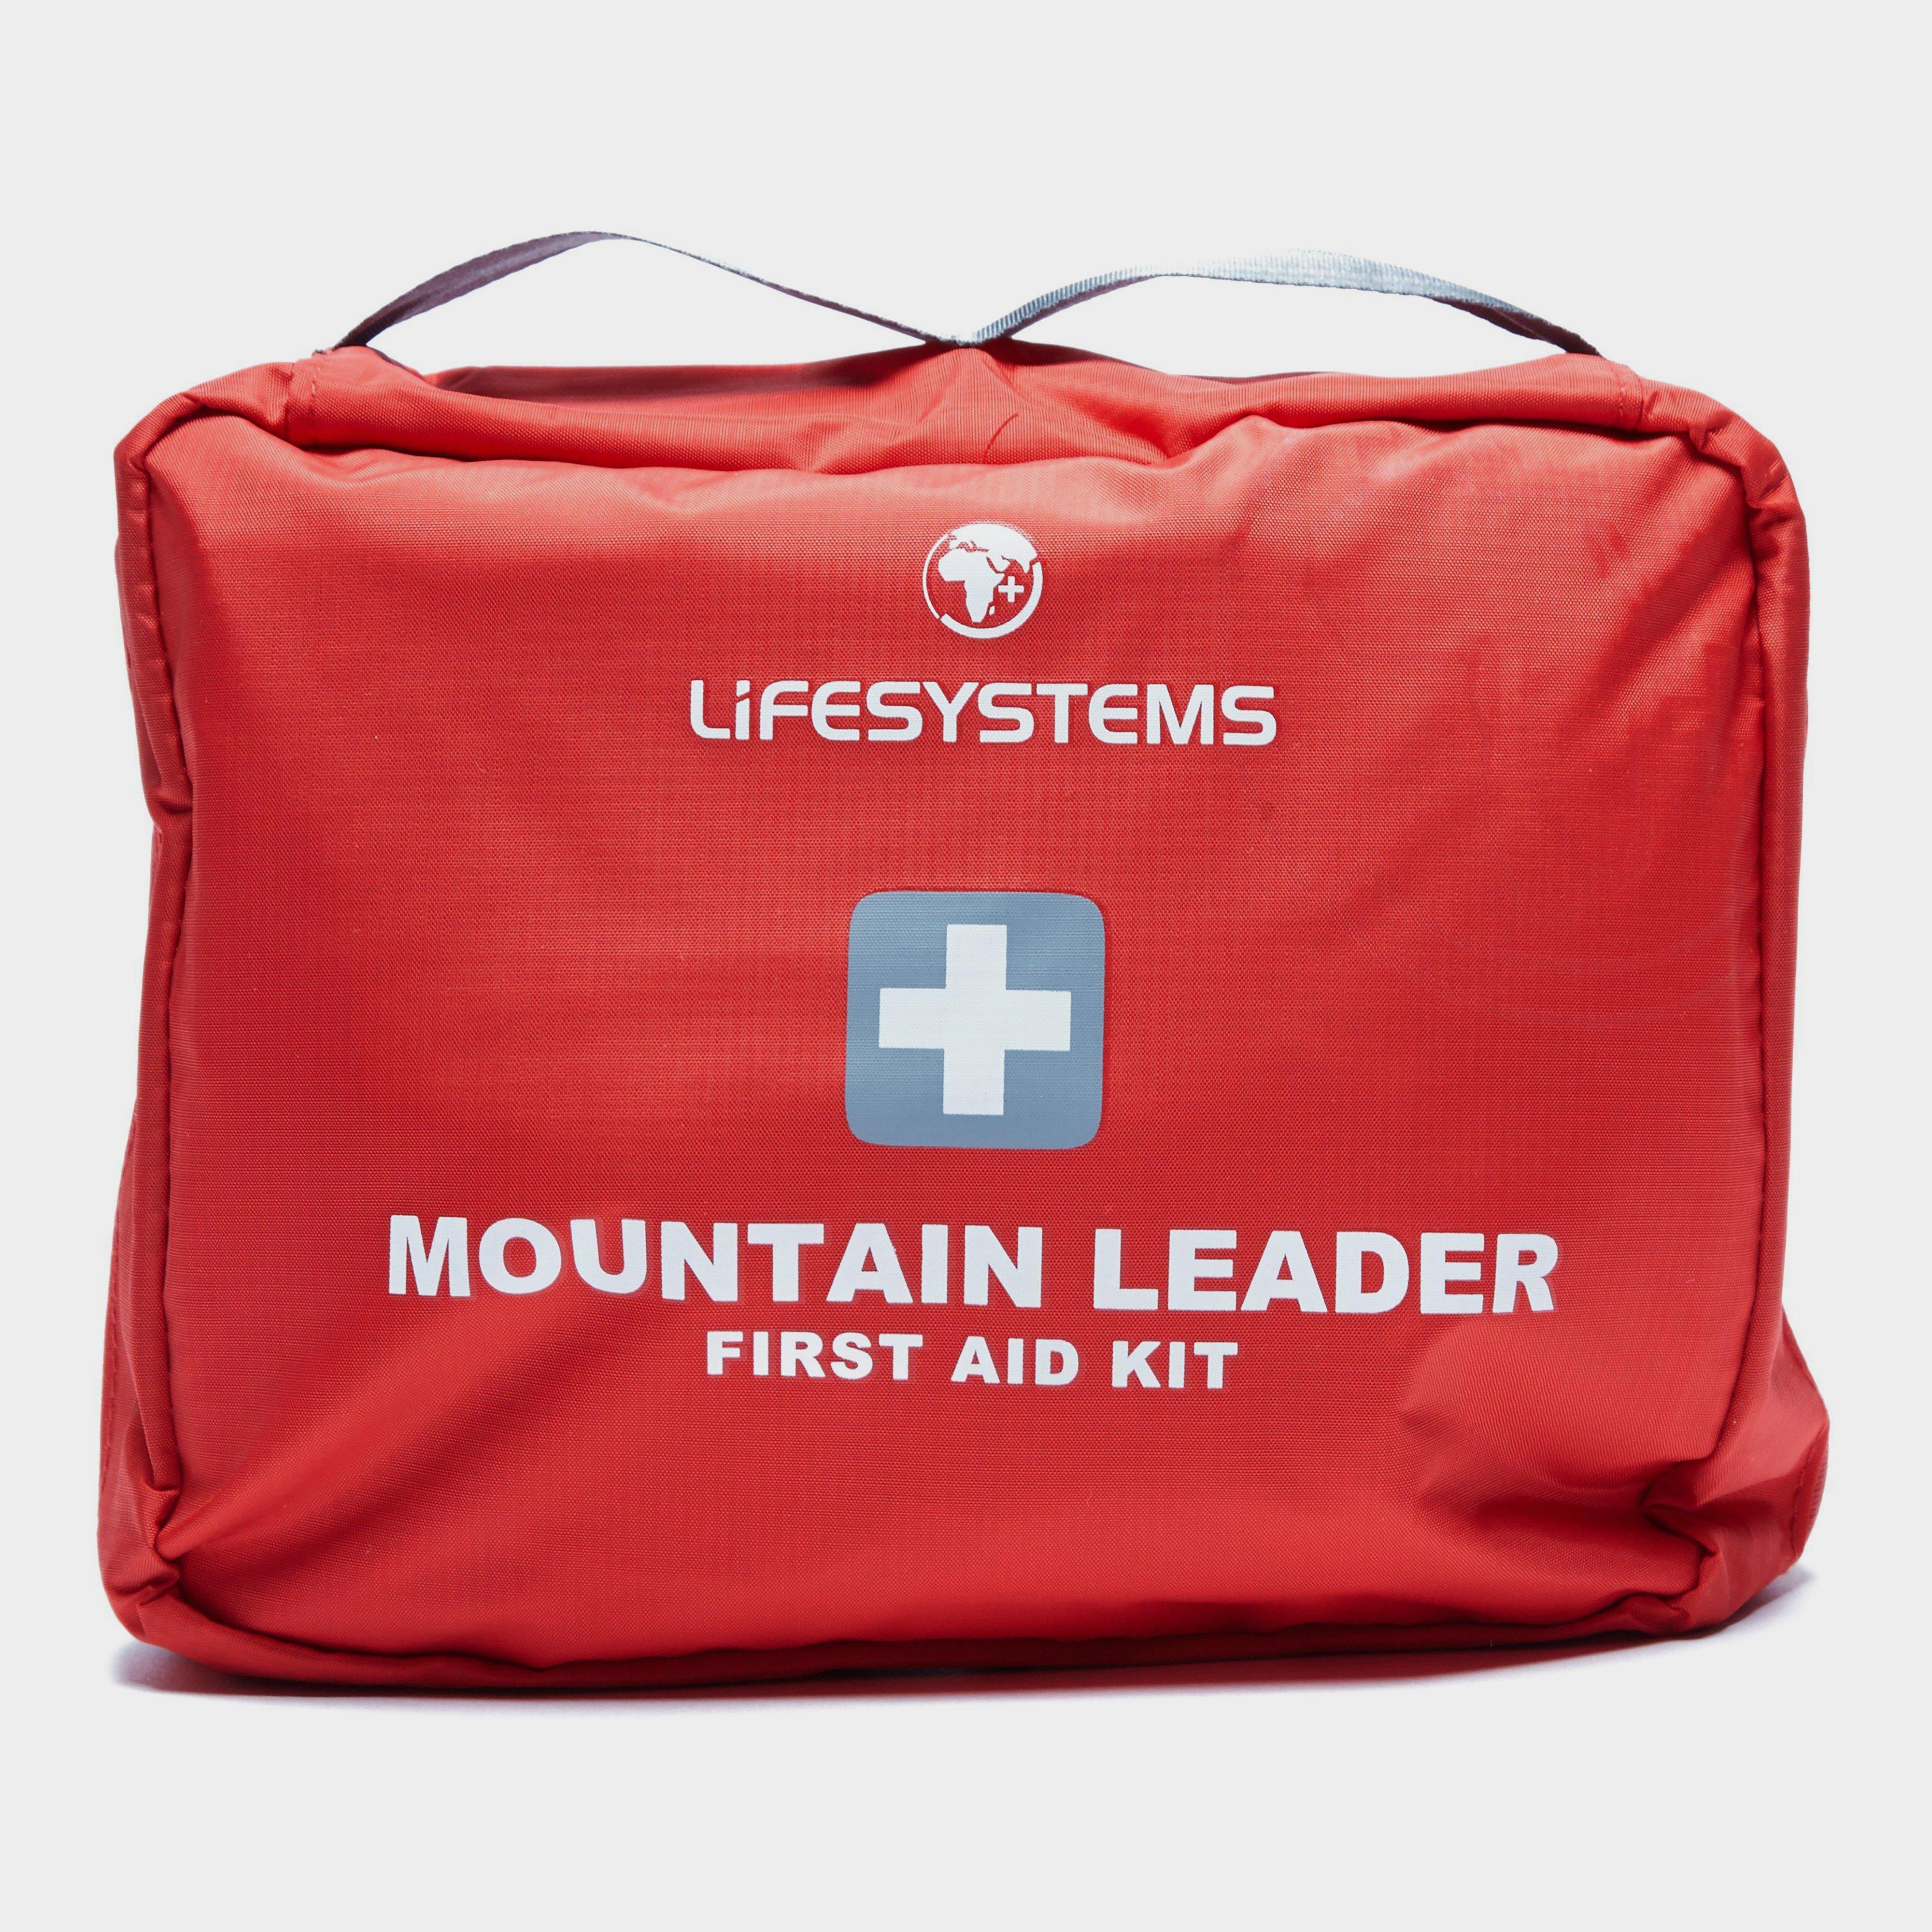 Lifesystems Lifesystems Mountain Leader First Aid Kit - Red, Red